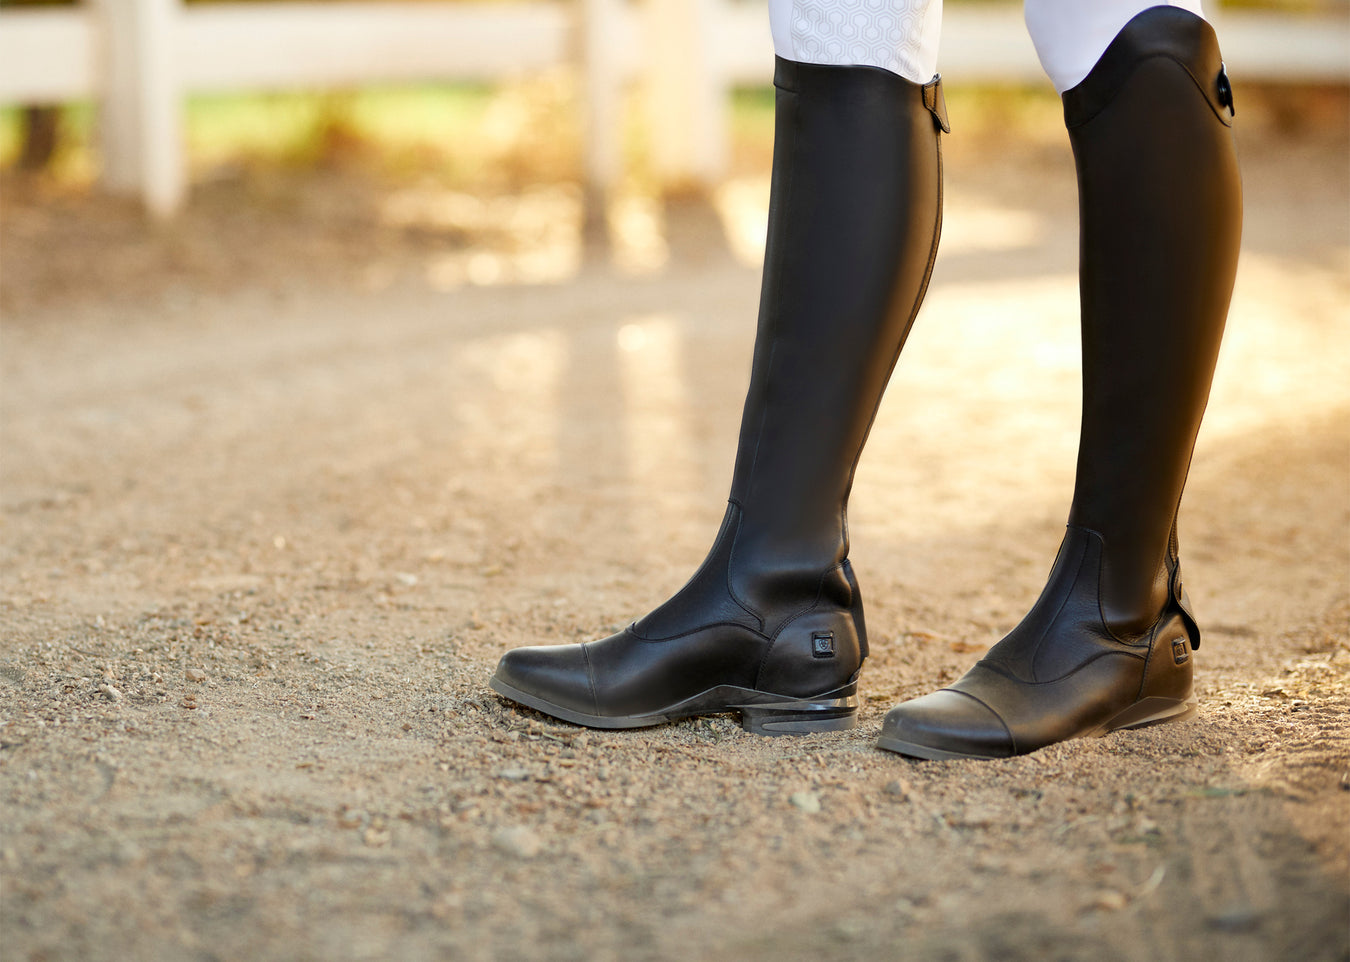 mens riding boots and mens yard boots from Ariat, DeNiro.  Mens Work boots from Ariat